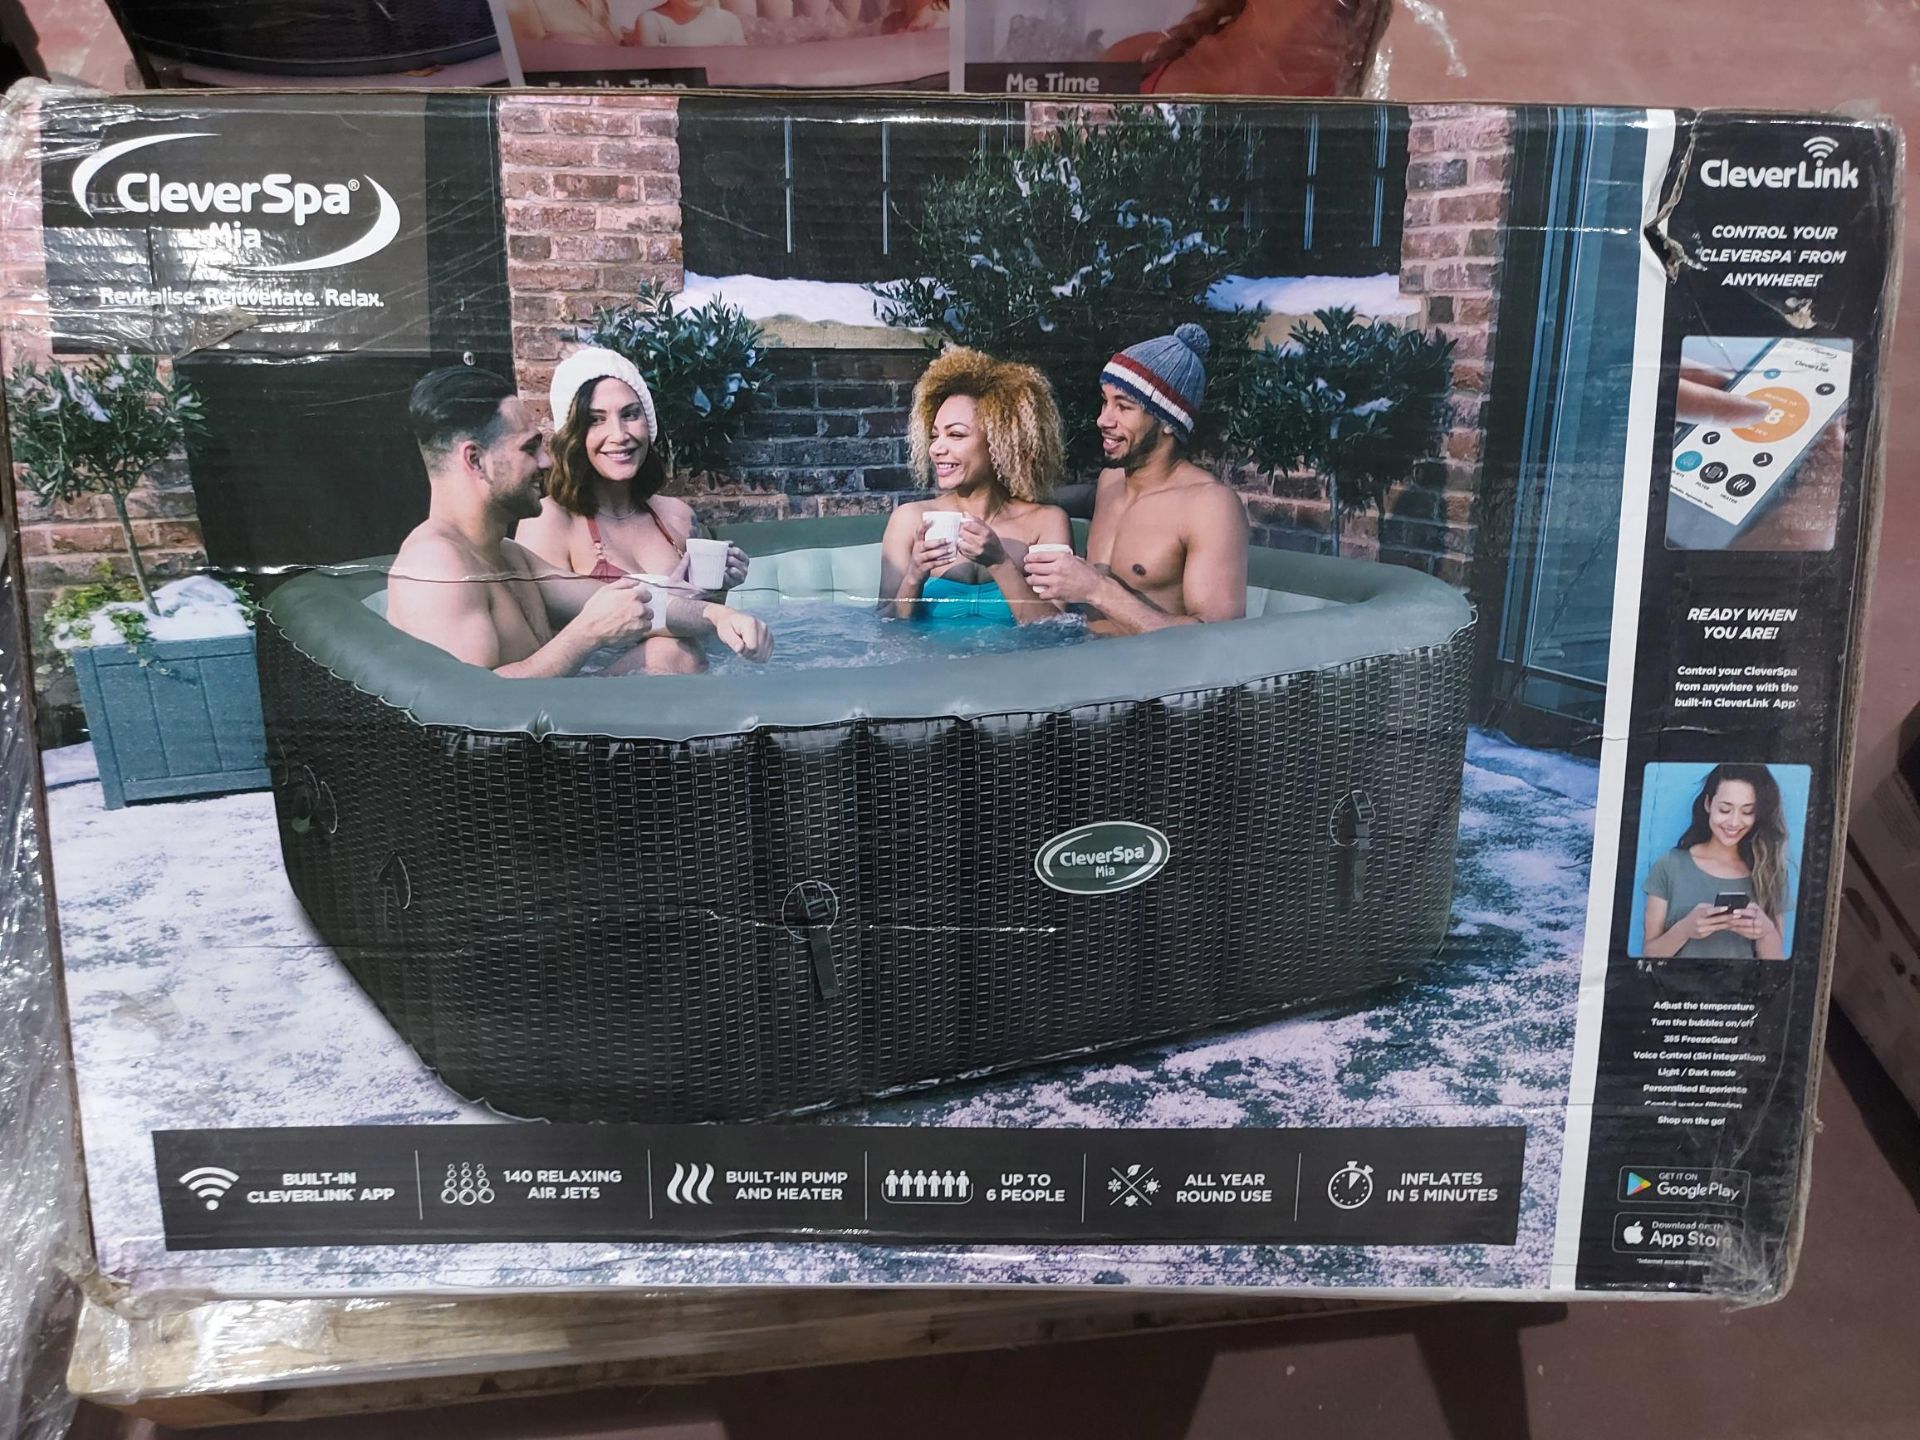 BOXED CleverSpa Mia 6 Person Hot Tub. RRP £525 - UNCHECKED/UNTESTED